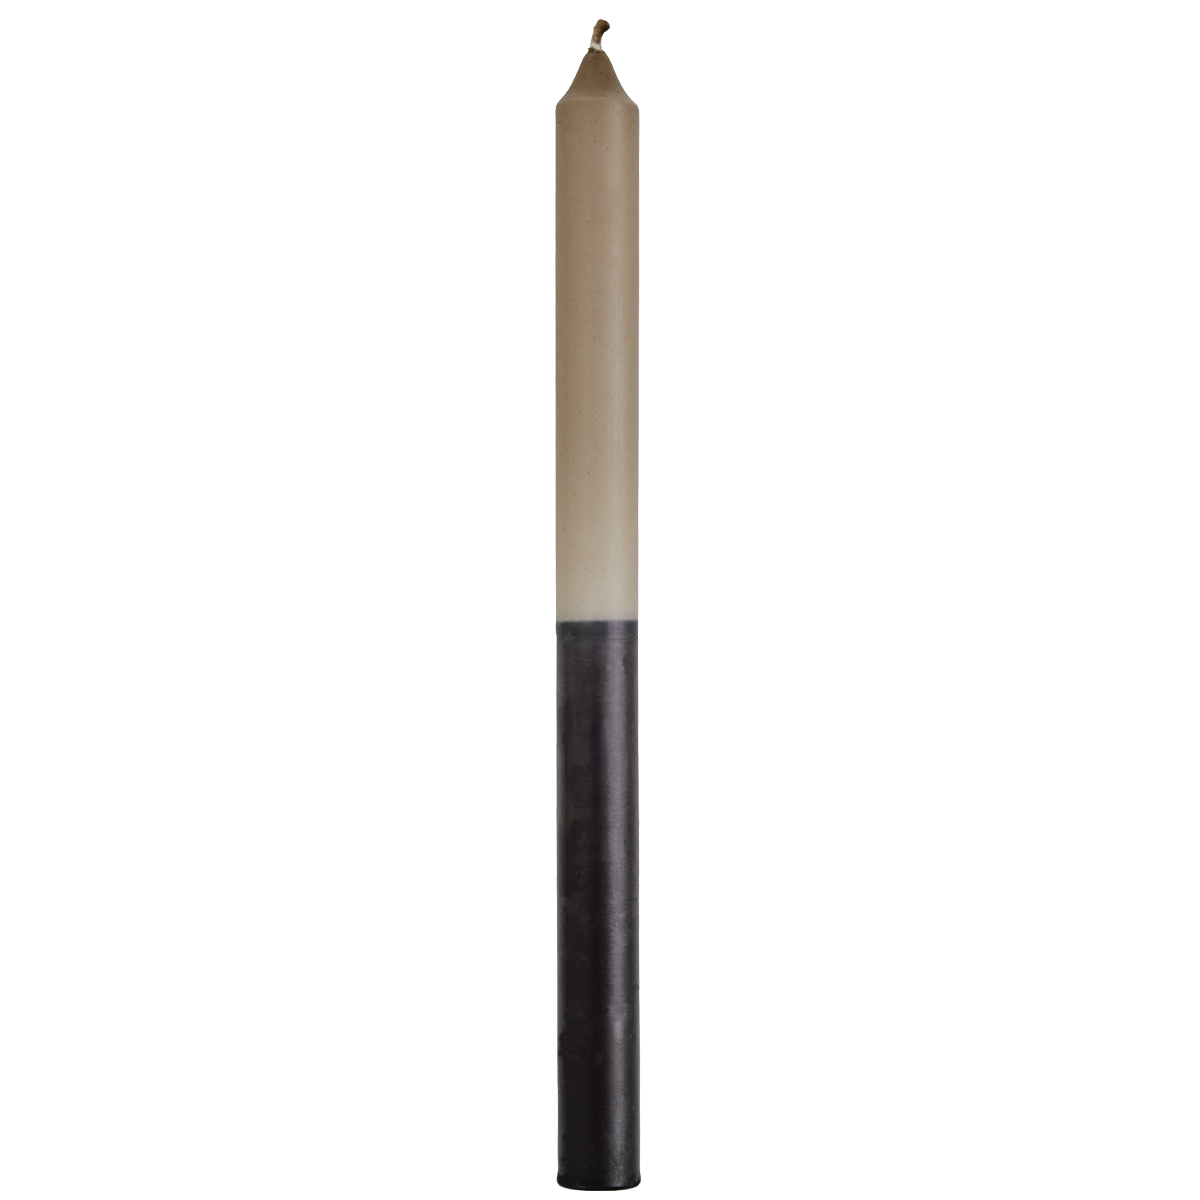 Madam Stoltz Taupe and Black Two Tone Dip Dye Candle